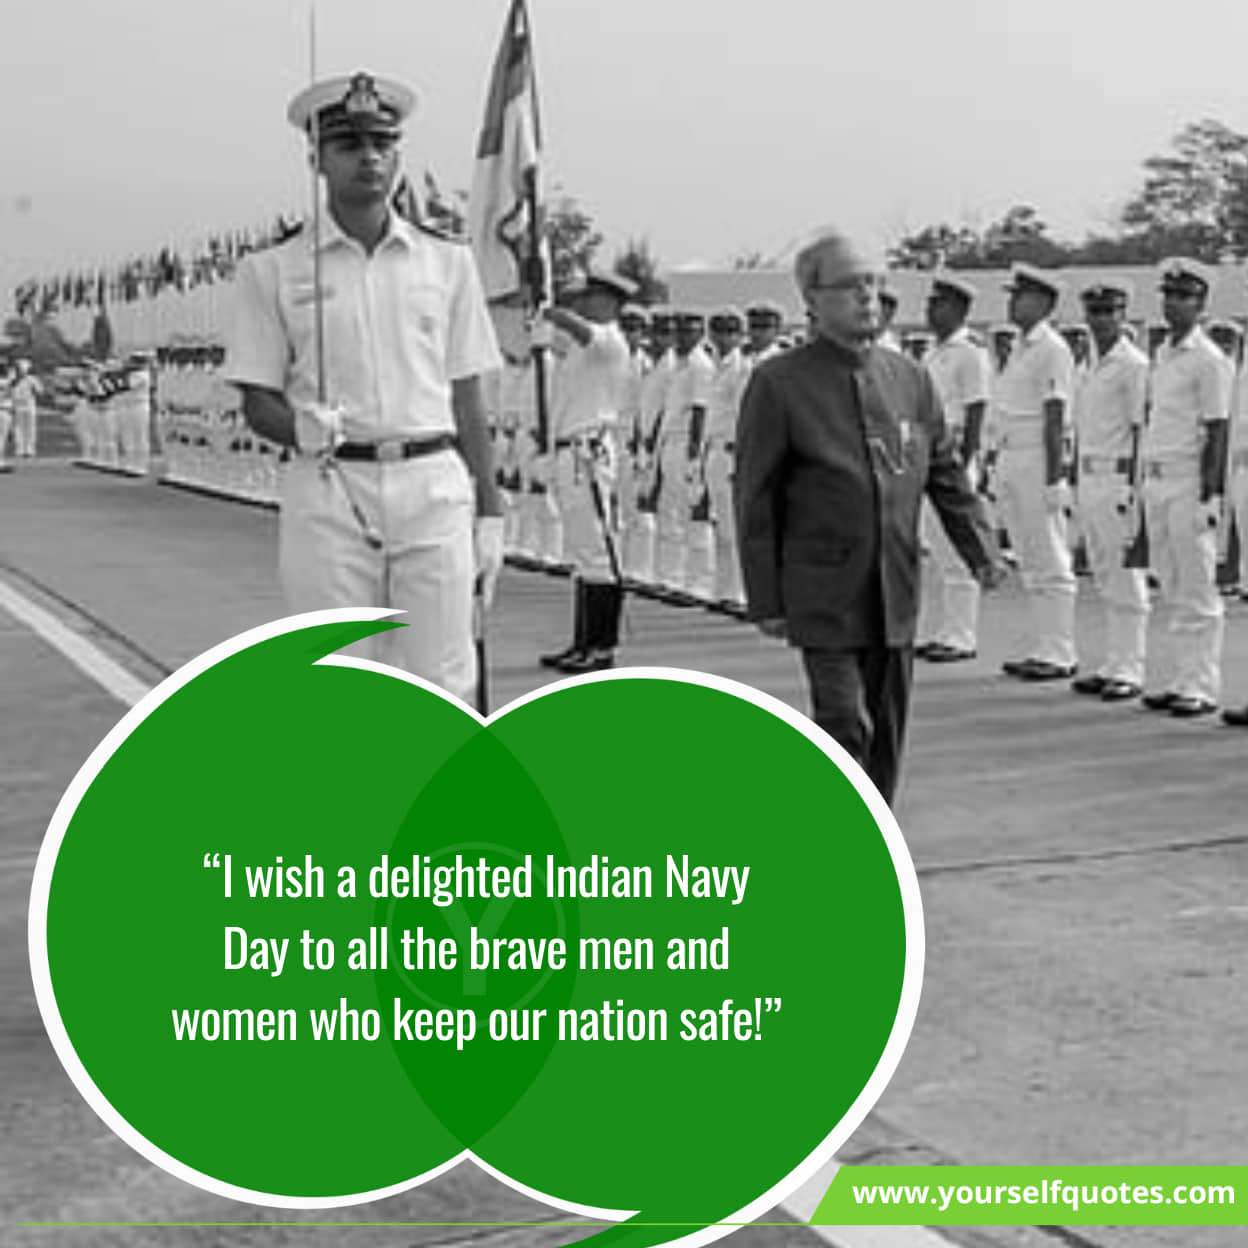 Indian Navy Day wishes and messages